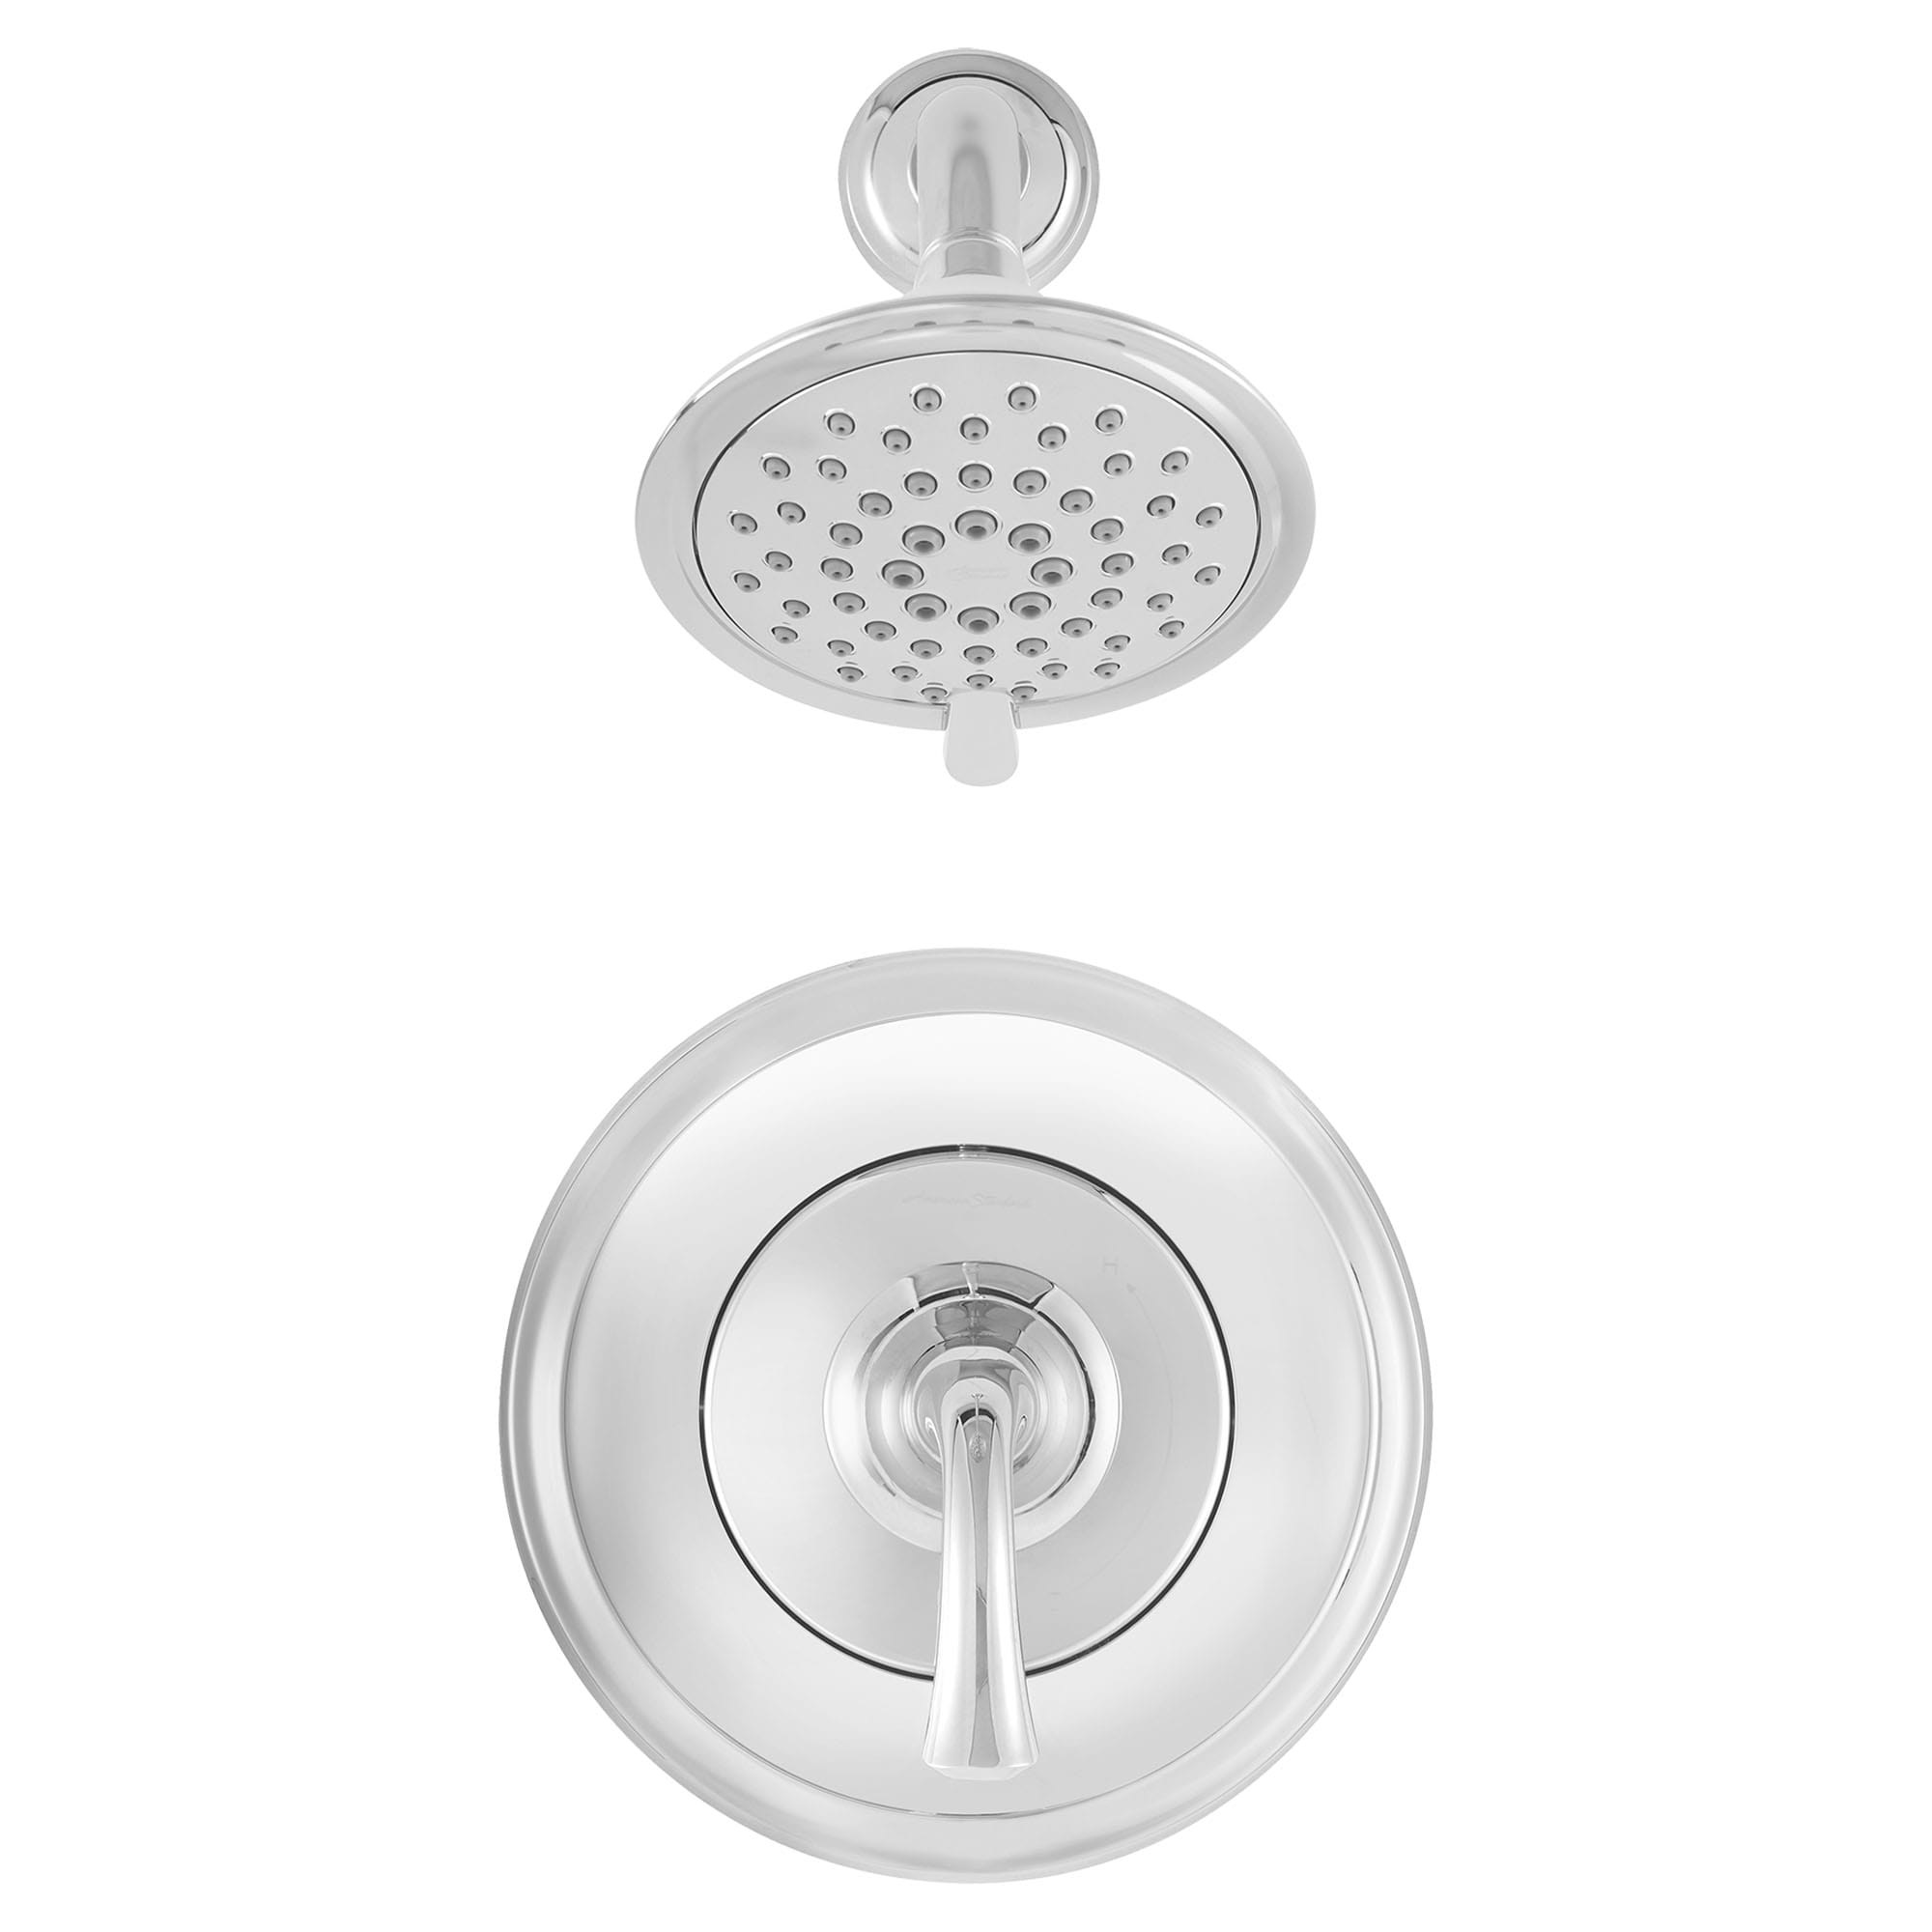 Patience 1.8 GPM Shower Trim Kit with Lever Handle